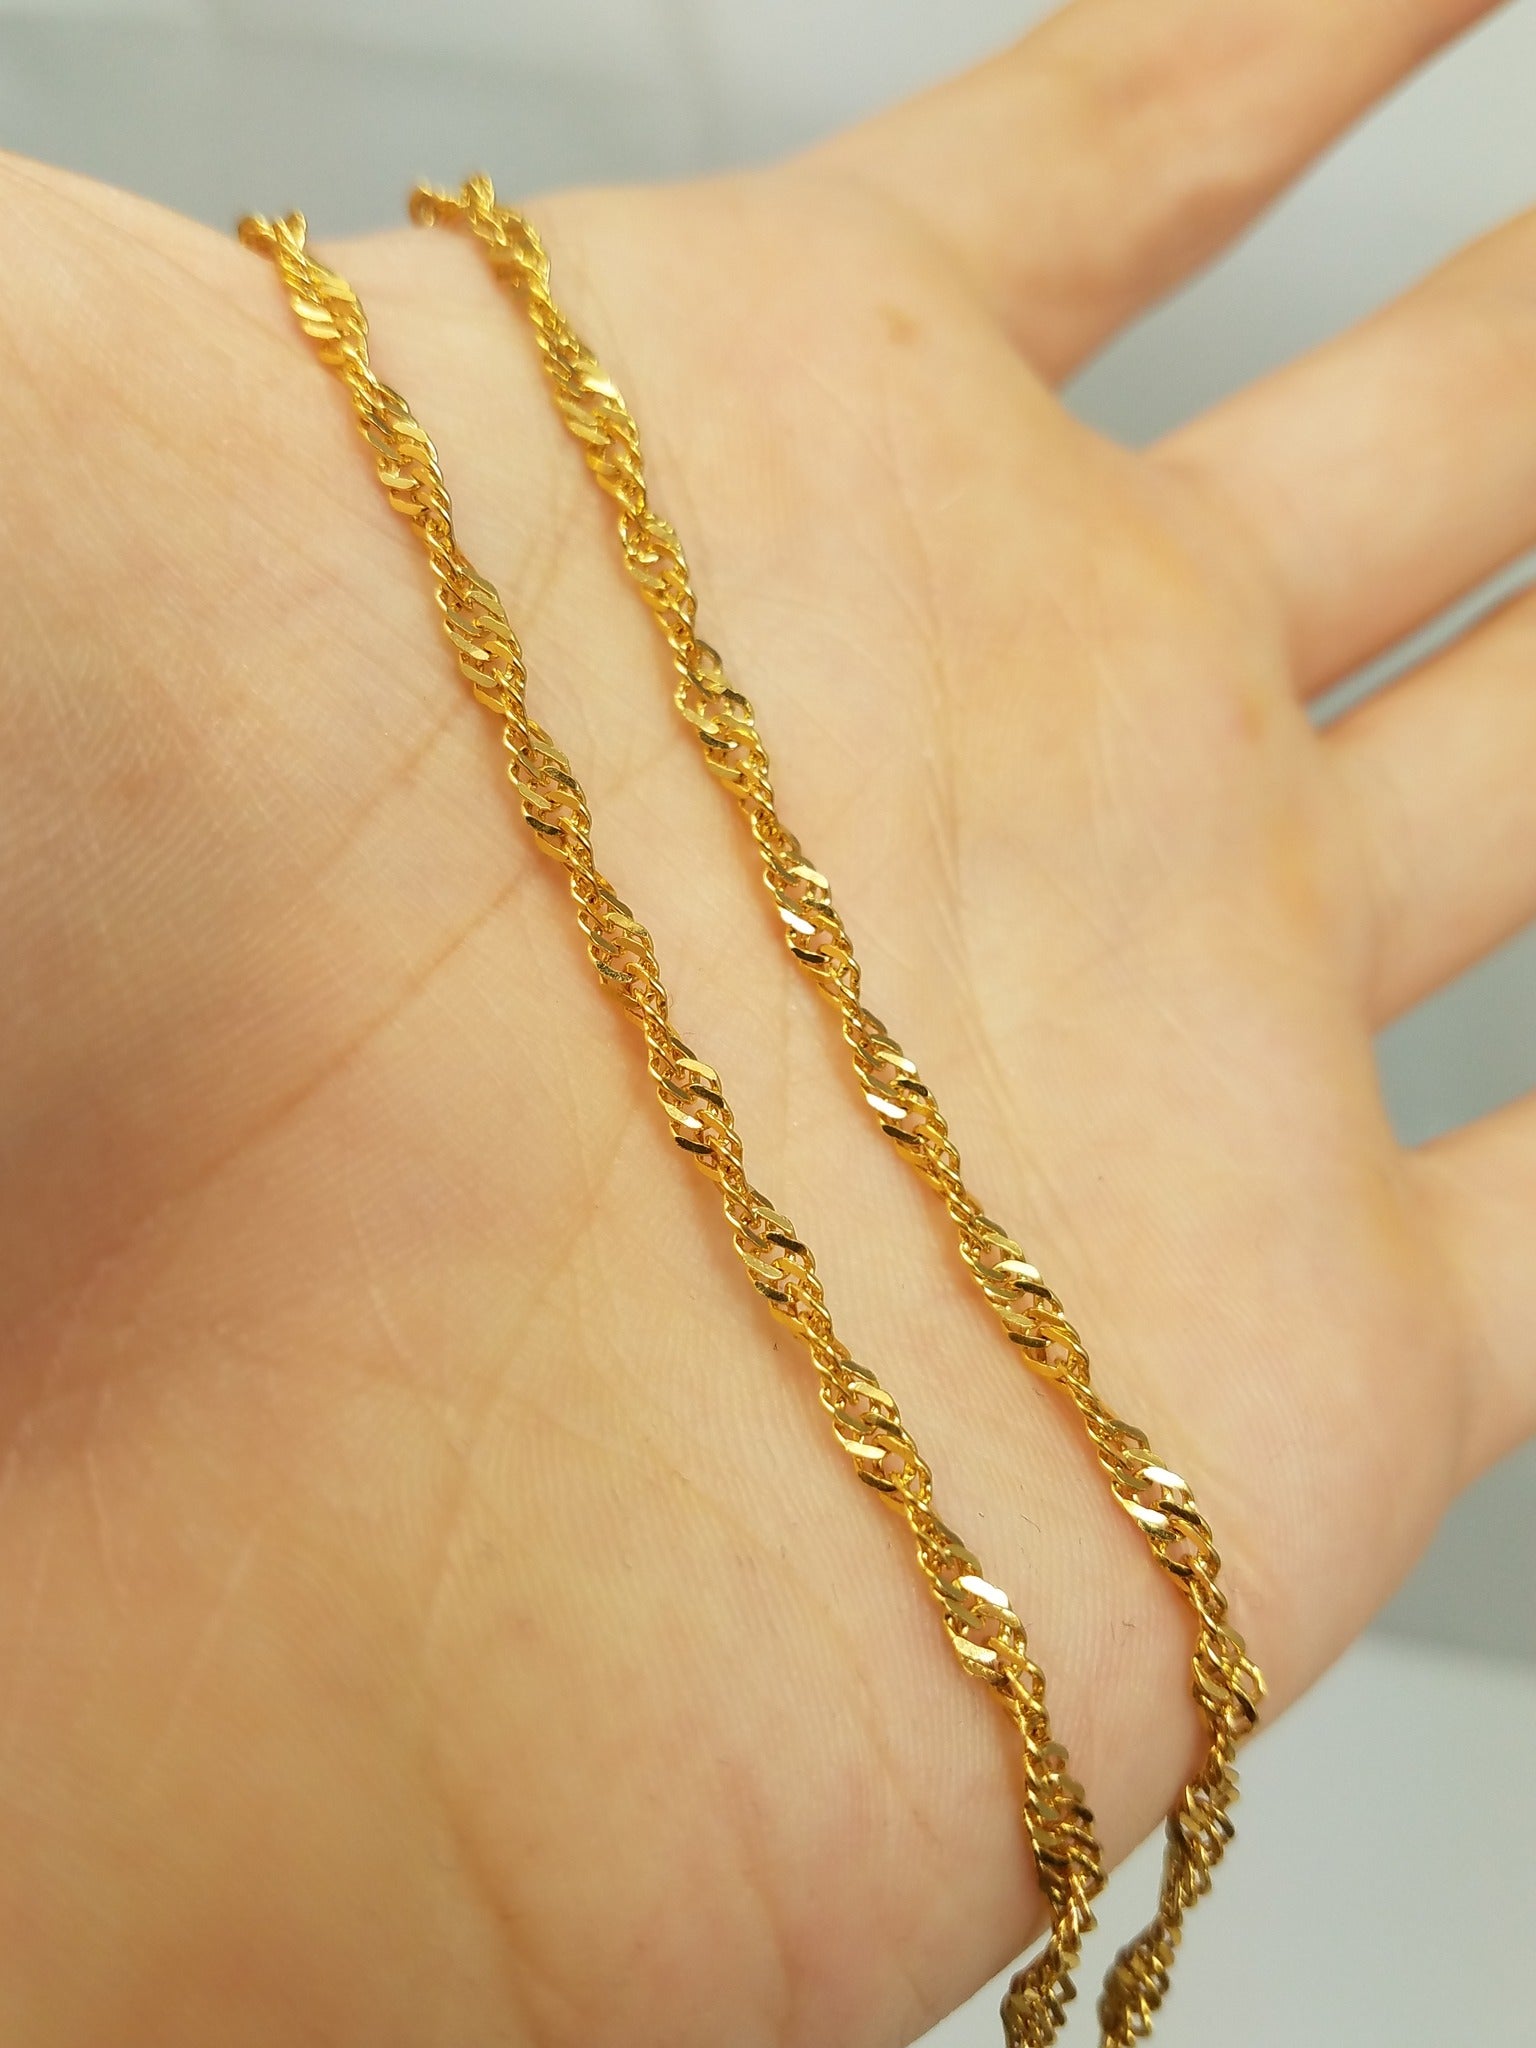 18" 22k Solid Yellow Gold Singapore Link Chain Necklace